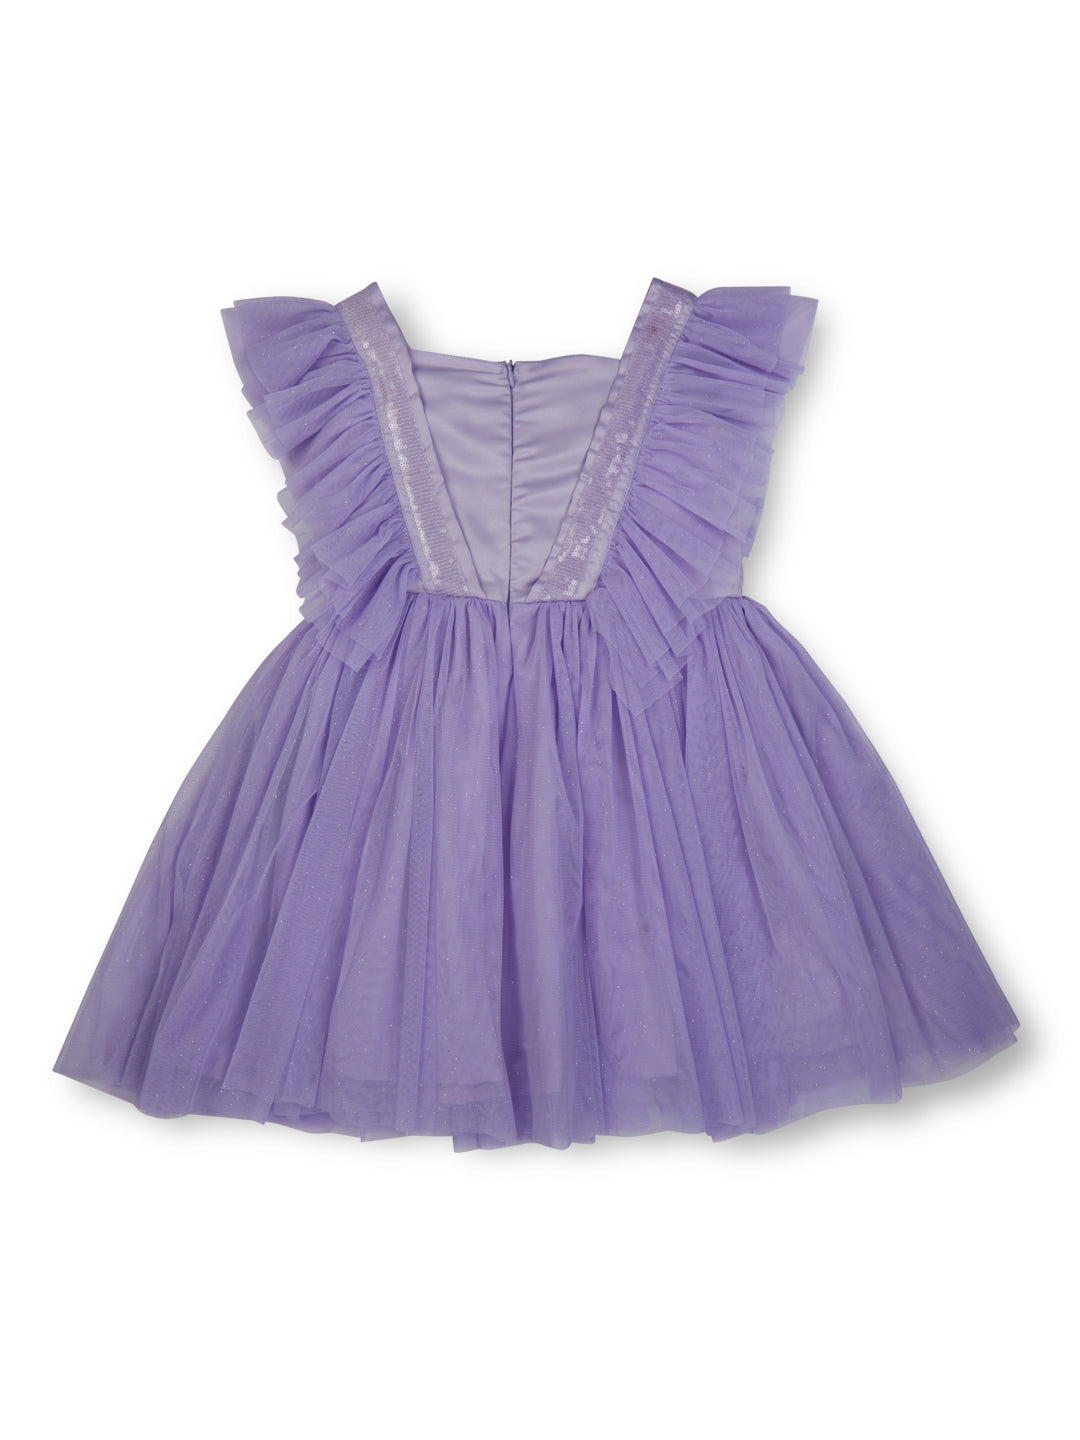 Girls purple party wear sequinned dress with lining.